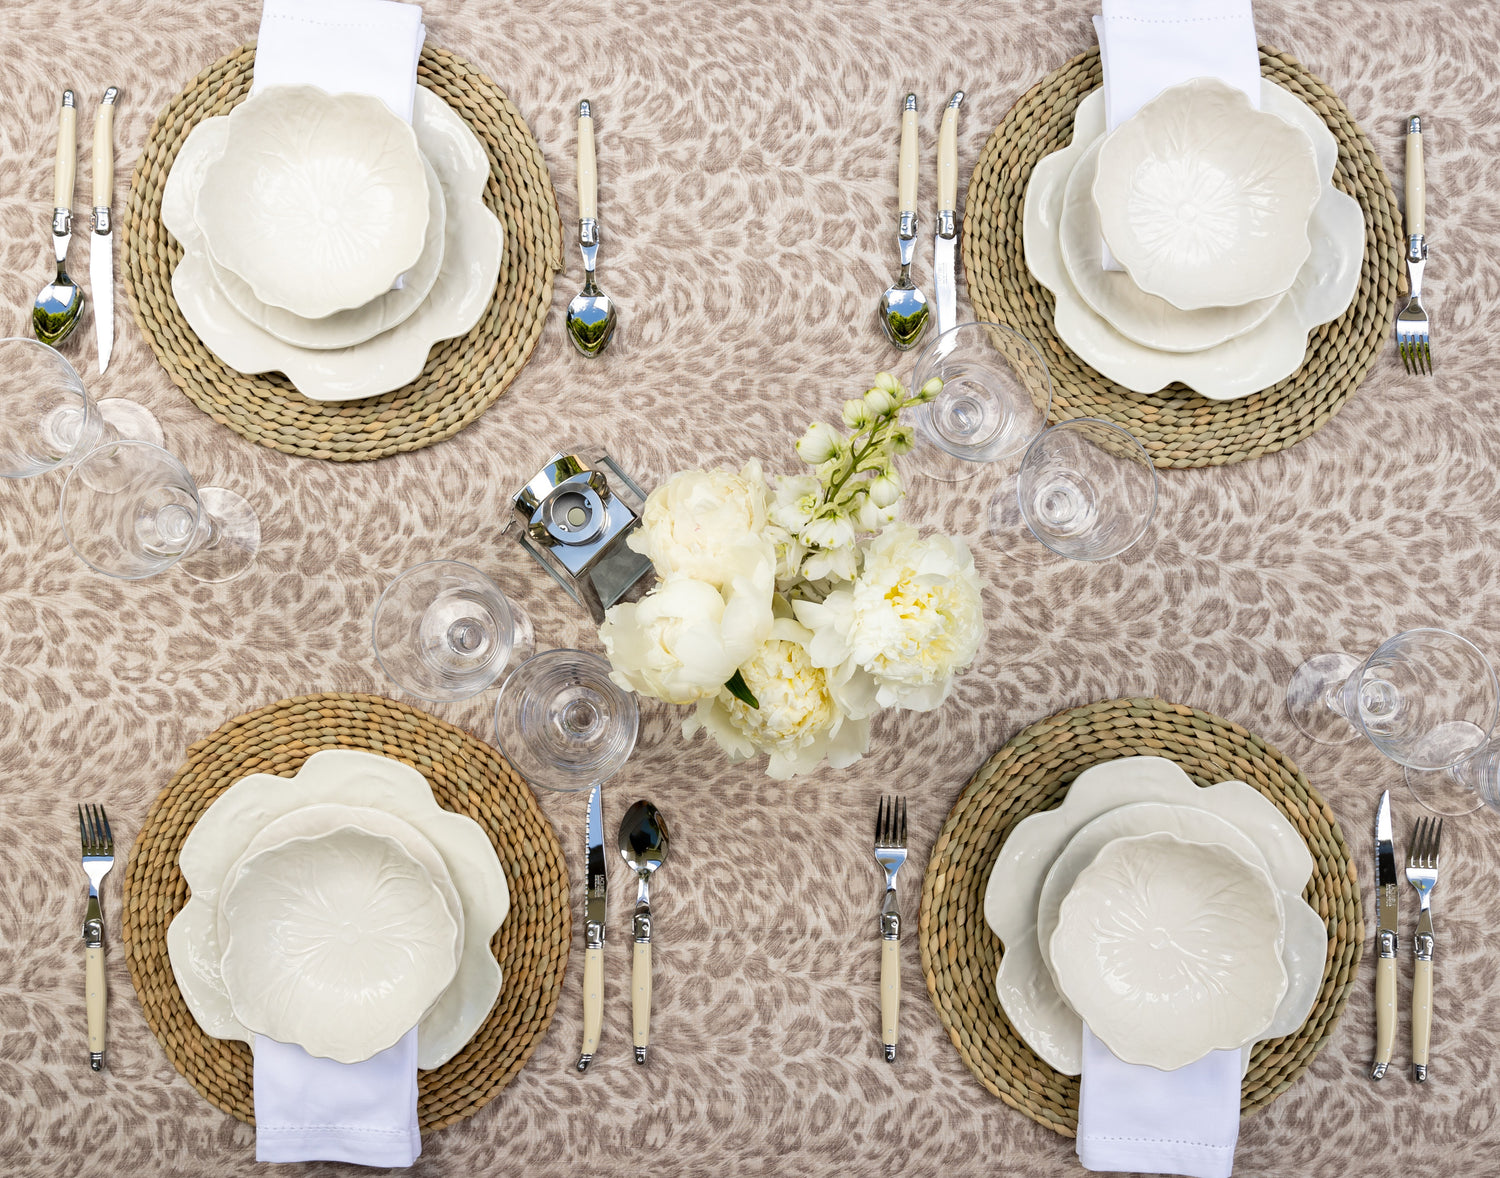 Birds Eye View Photo of the White Dulce Tablescape Setting With Leopard Print Tablecloth